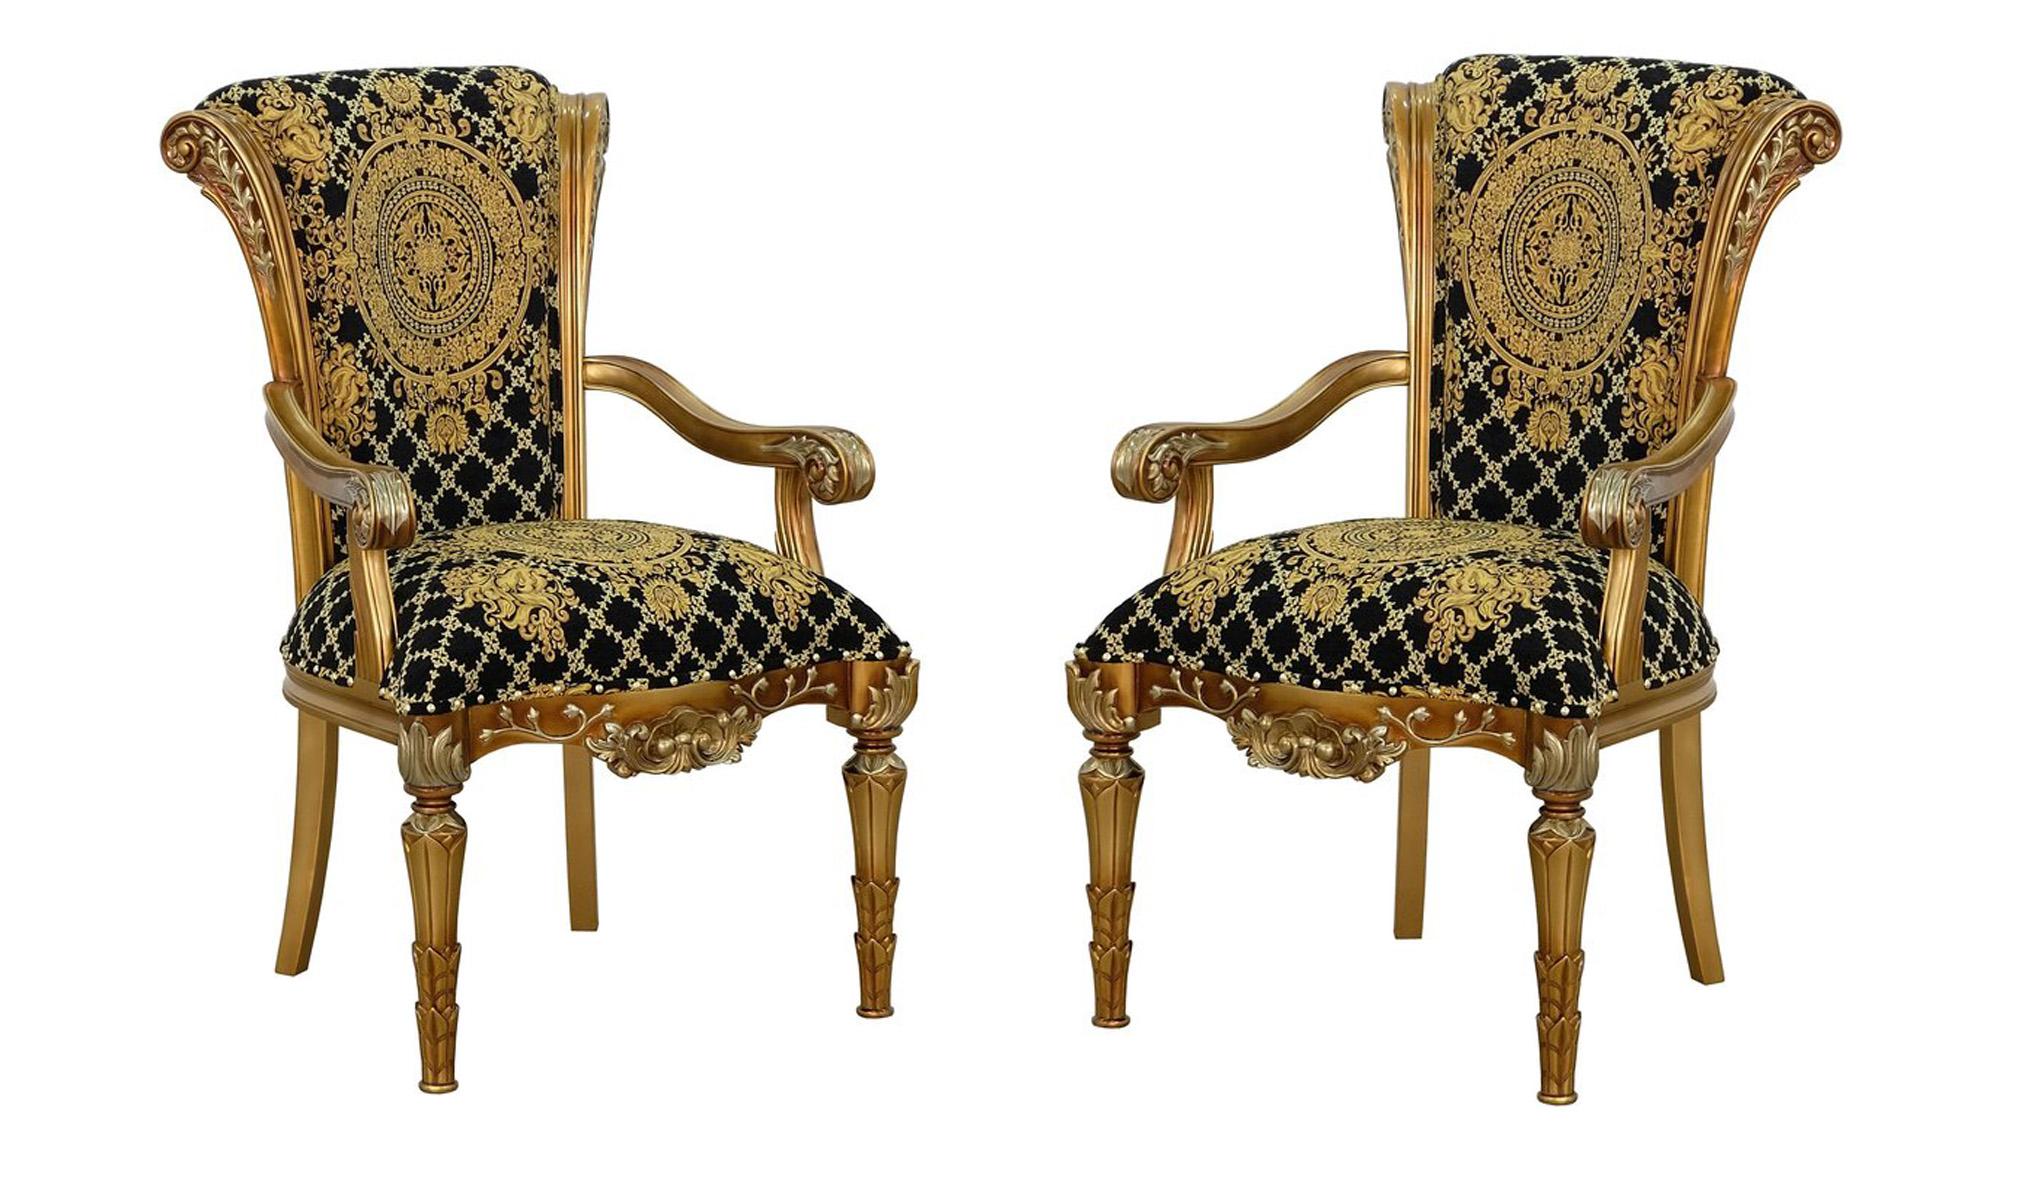 Classic, Traditional Dining Arm Chair Set VALENTINA 61958-AC-Set-2 in Ebony, Gold, Bronze, Black Fabric